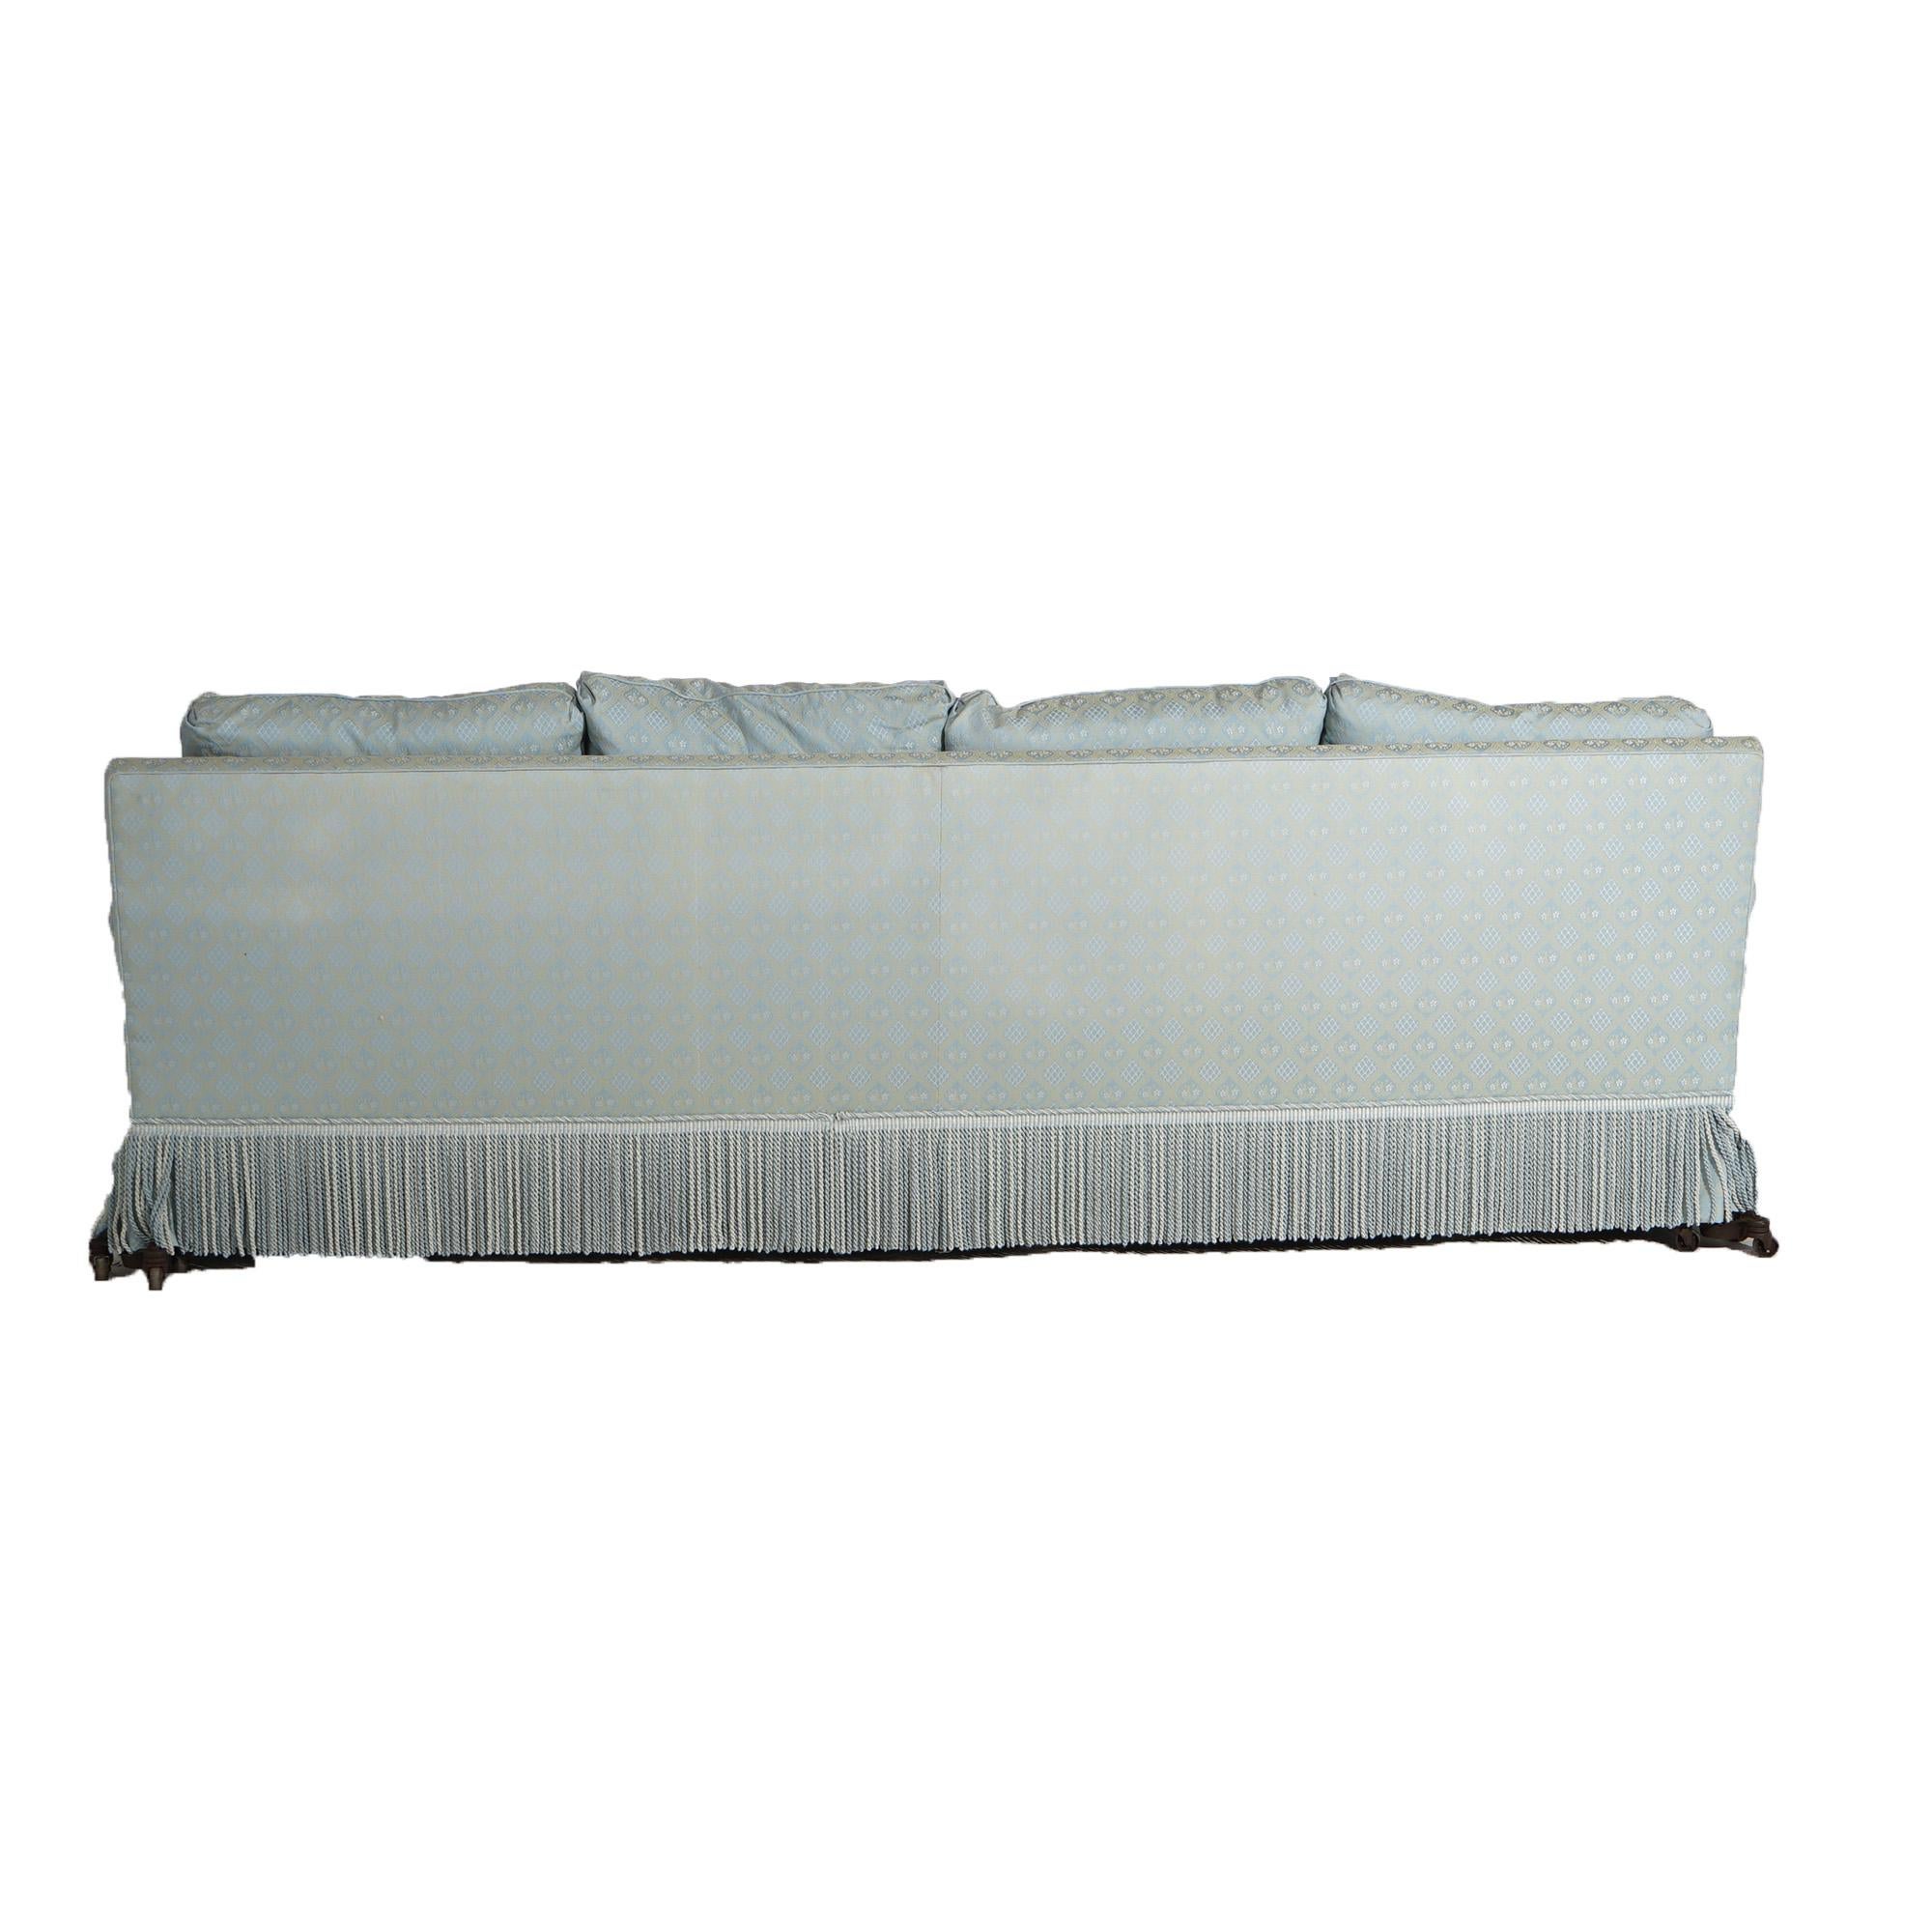 Hollywood Regency Upholstered Pillow Back Long Sofa with Fringe Skirt 20thC In Good Condition For Sale In Big Flats, NY